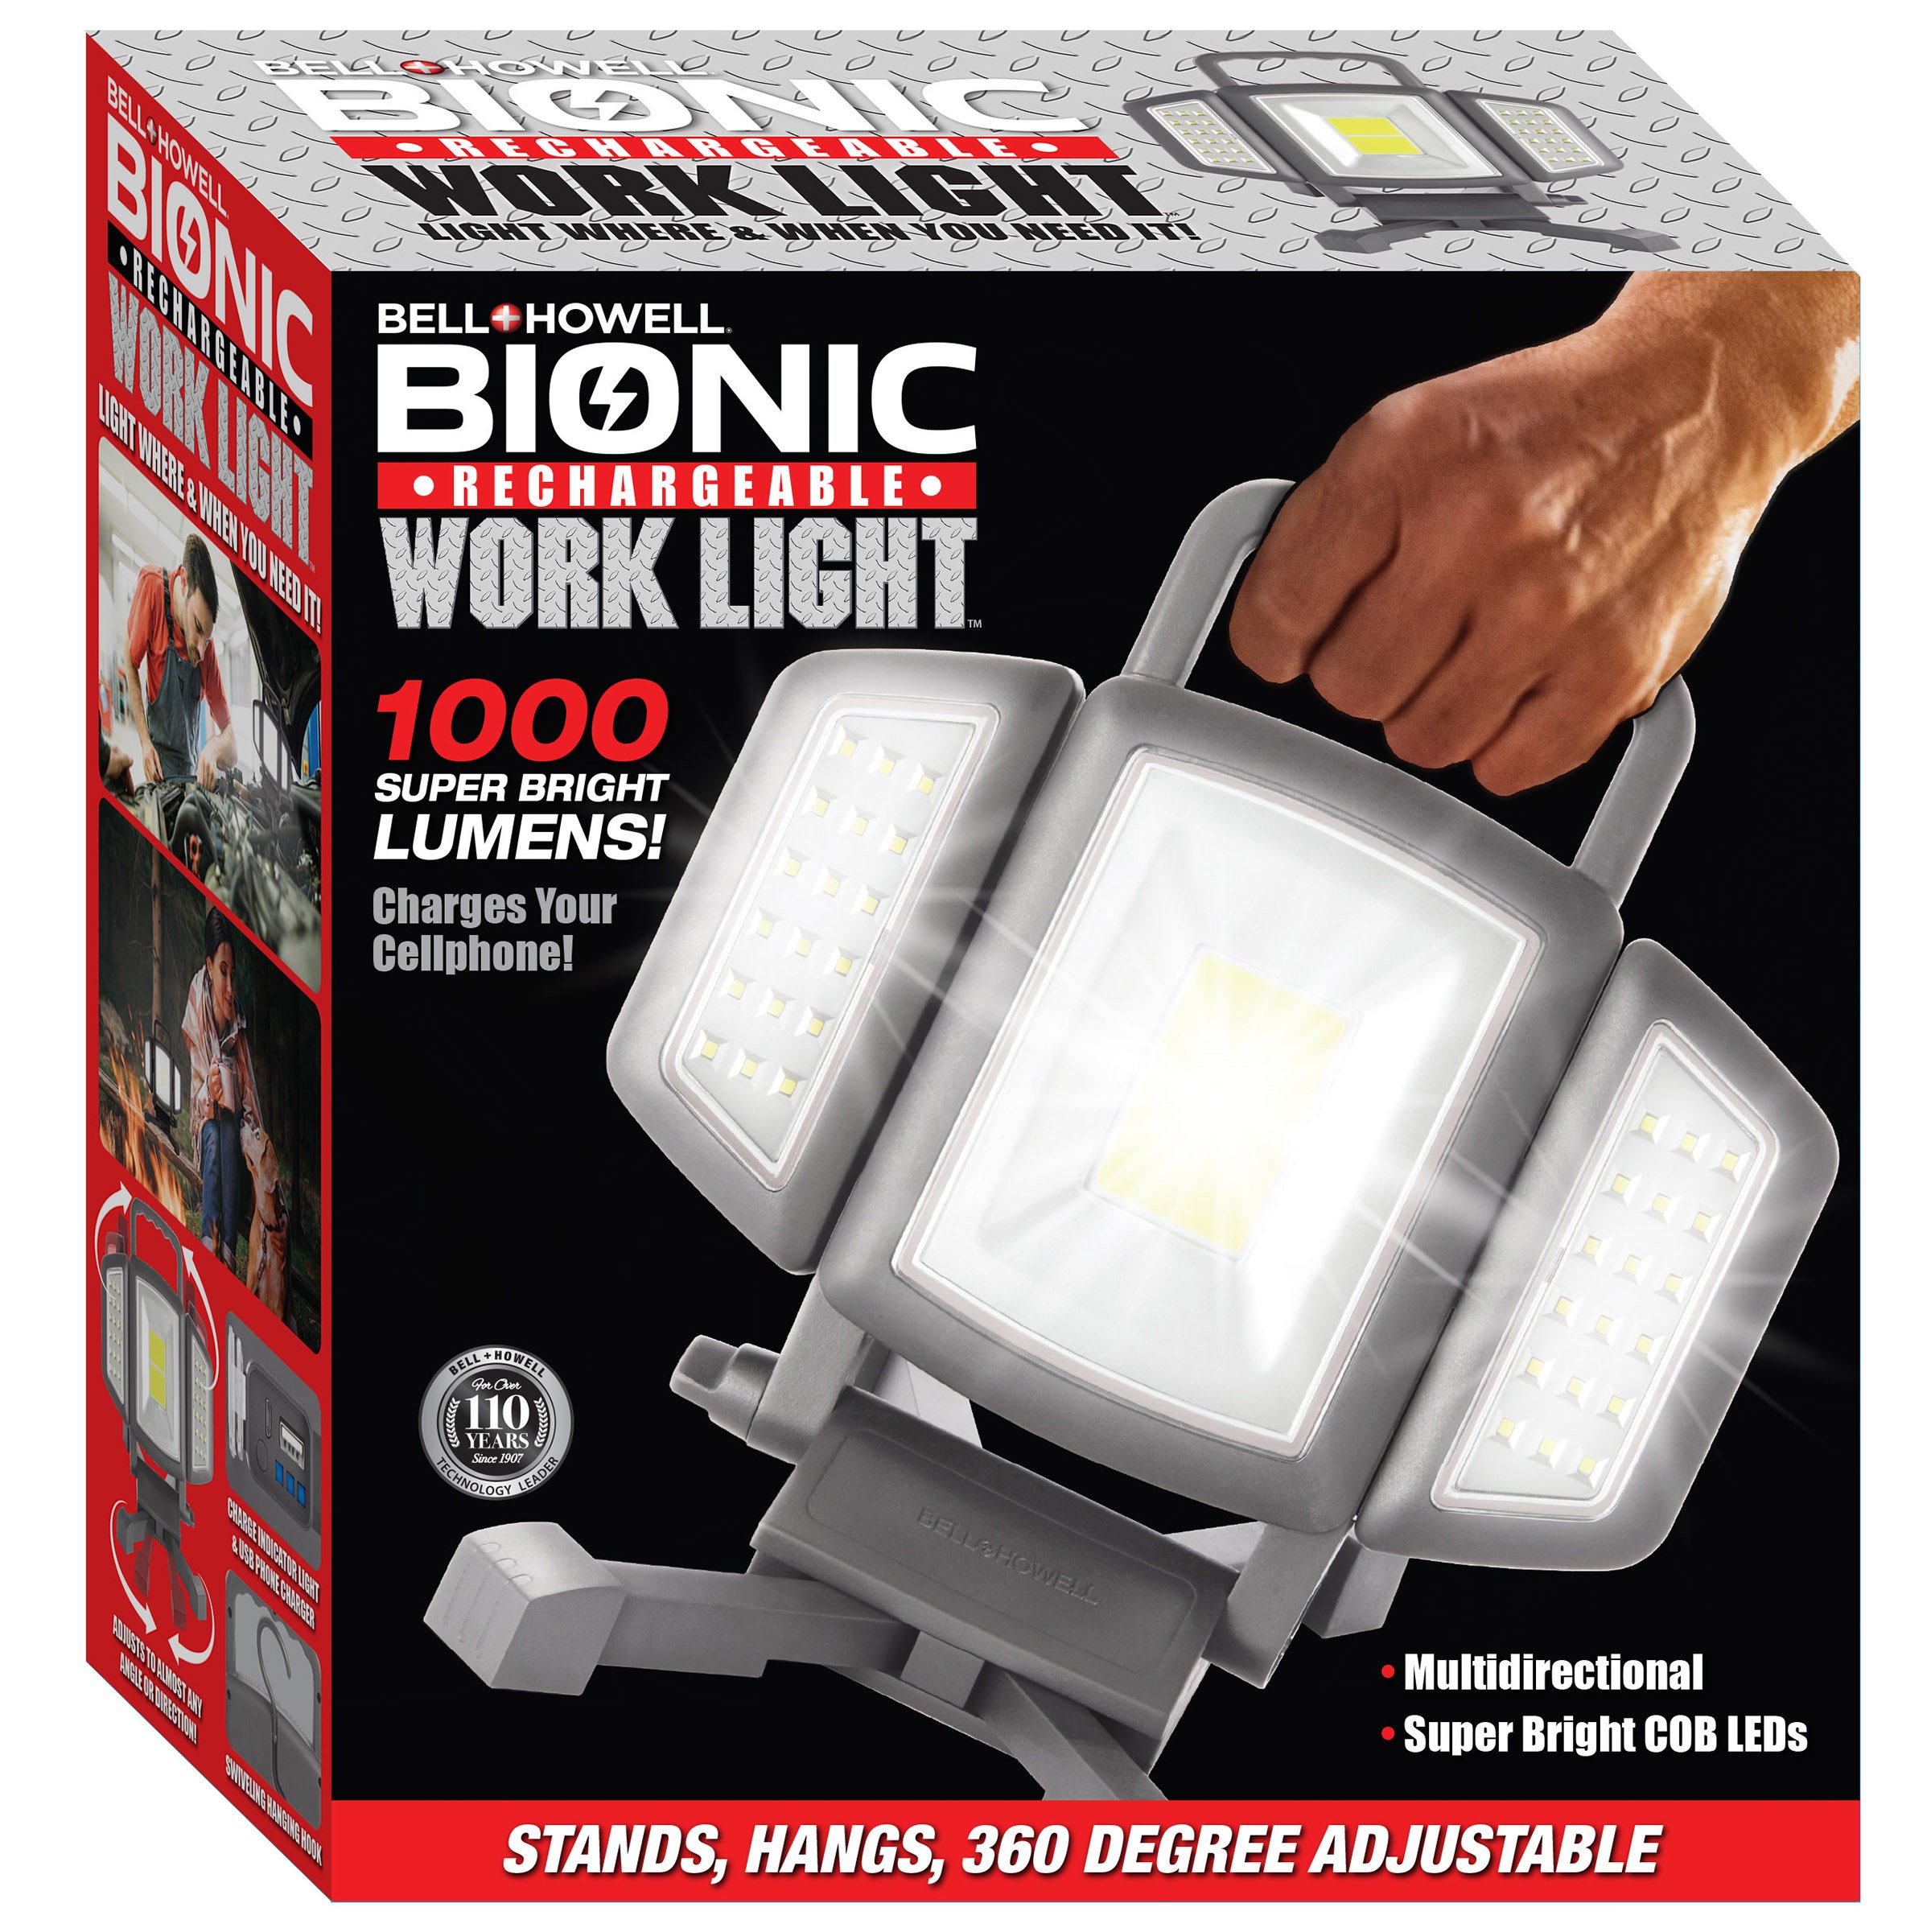 Bell + Howell Bionic Rechargeable Multi-Directional Work Light